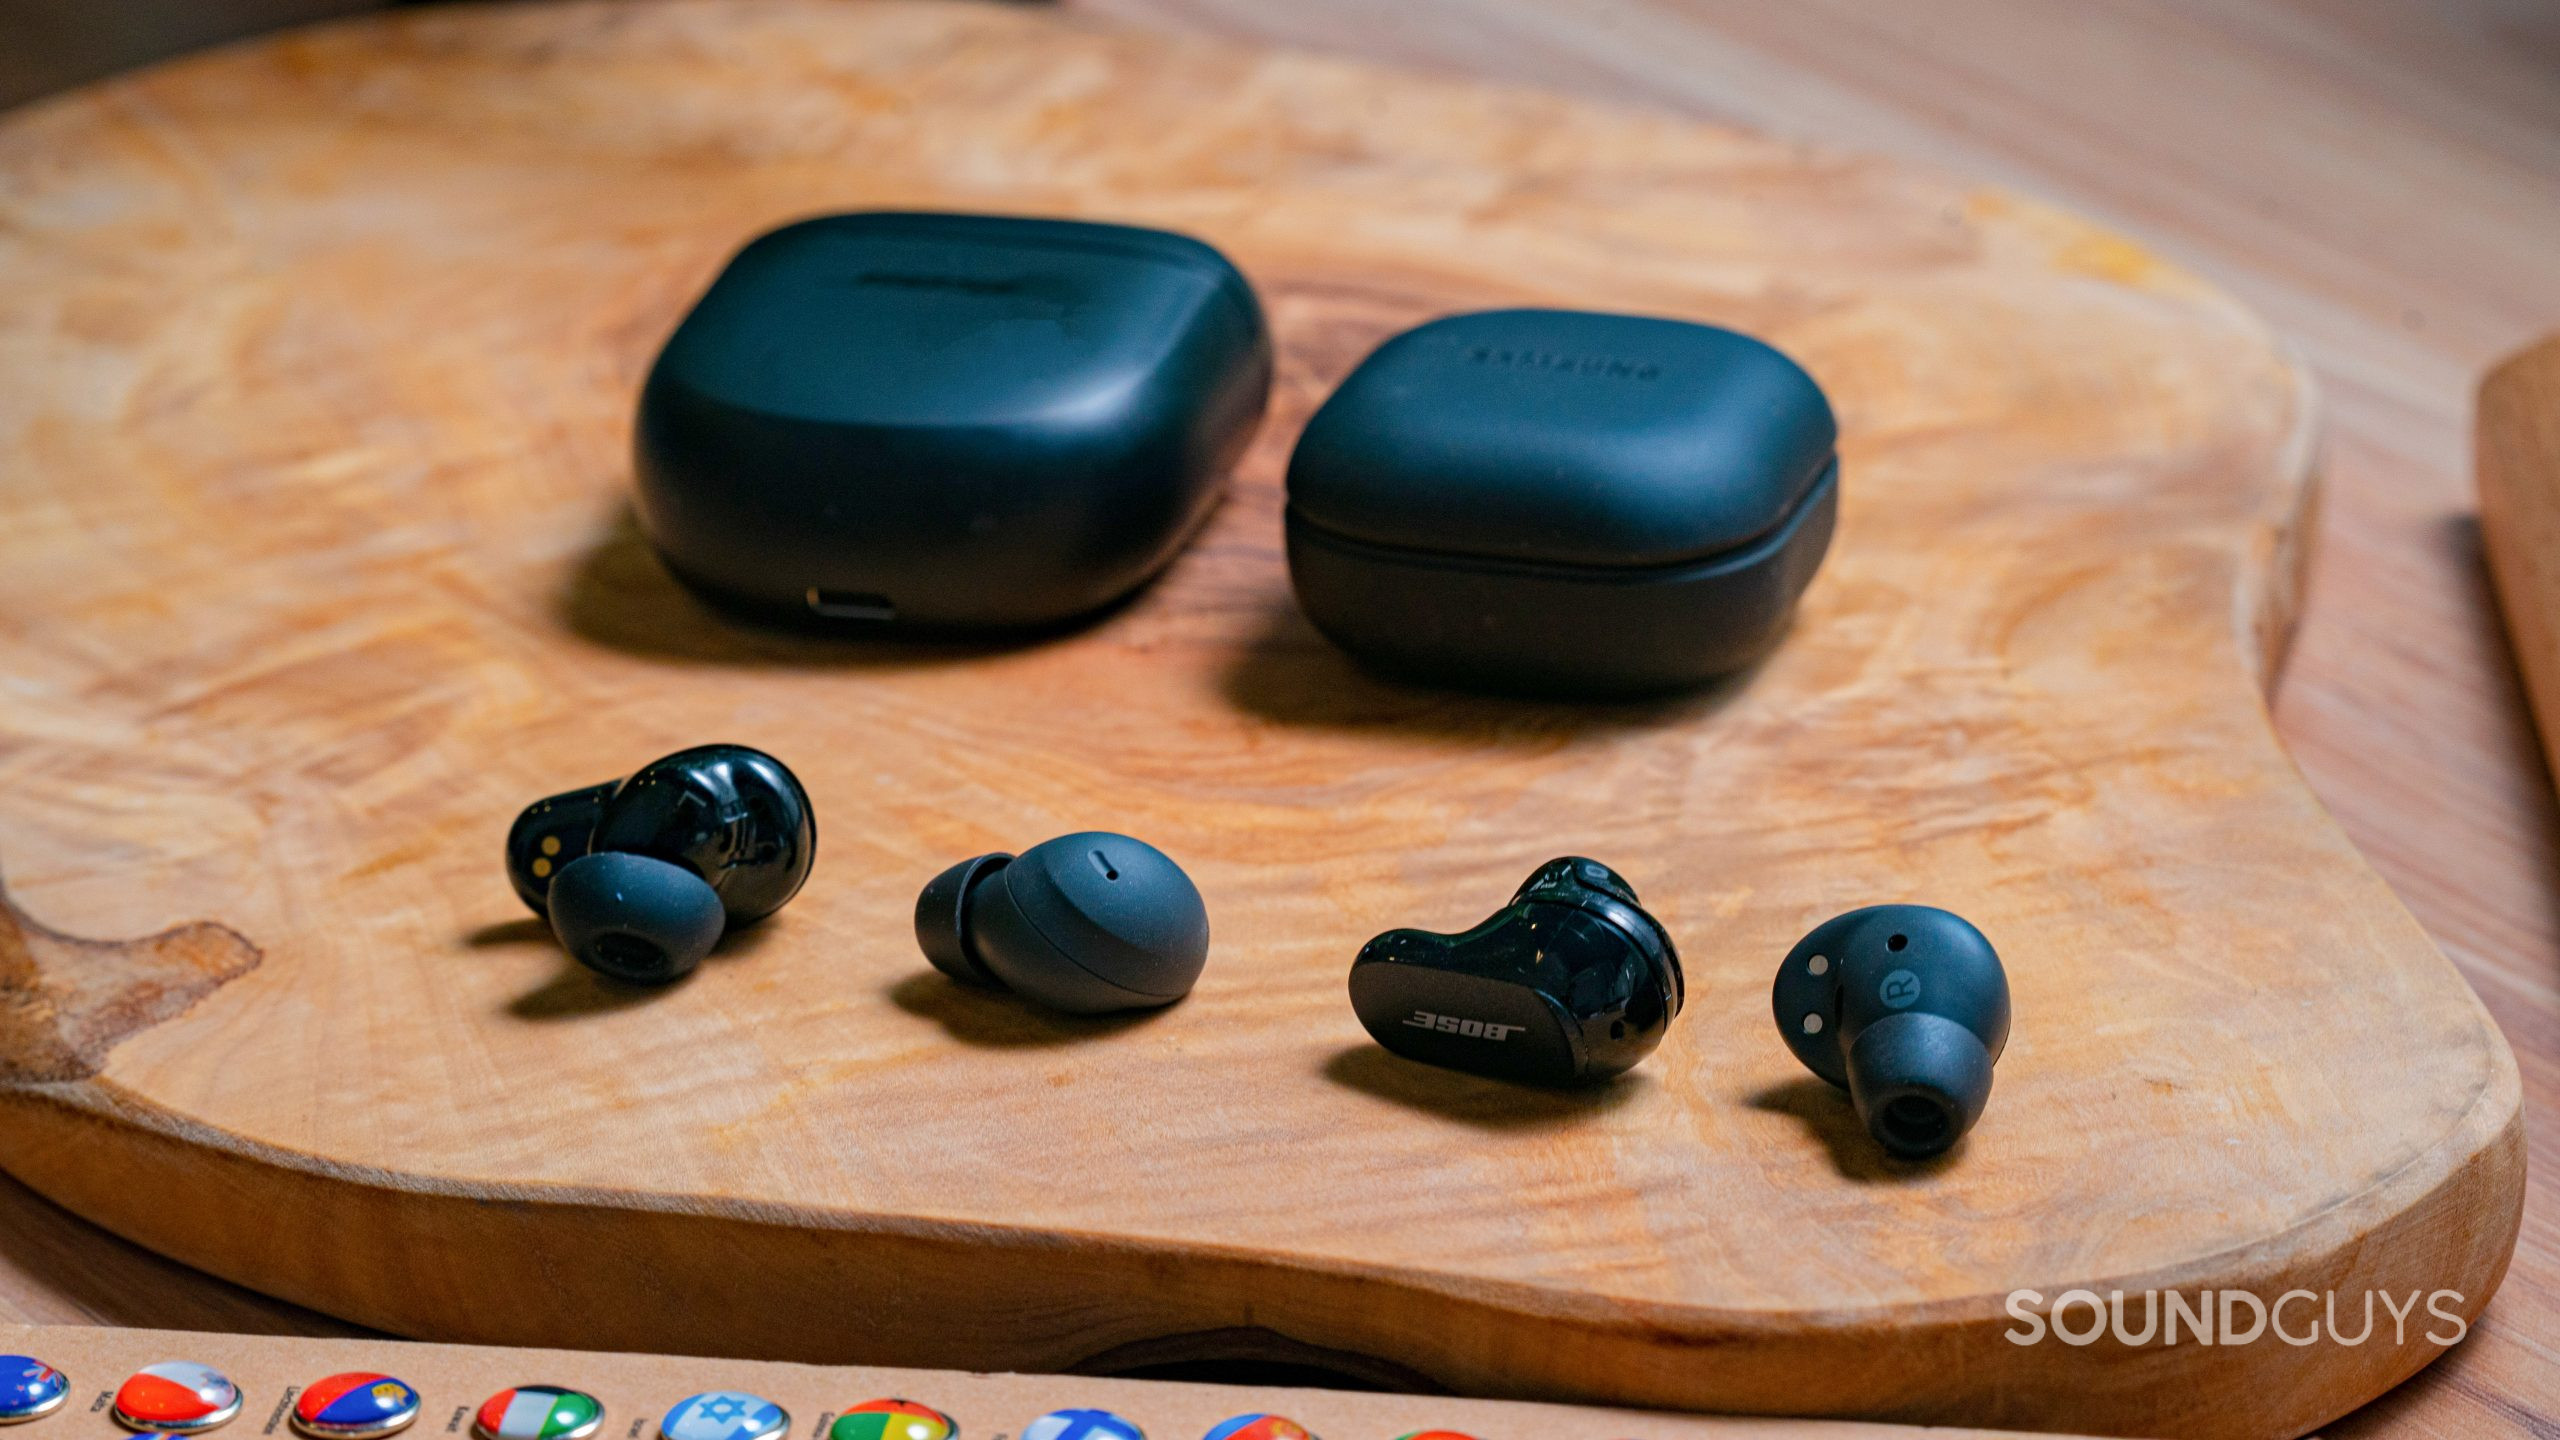 The Bose QuietComfort Earbuds II and Samsung Galaxy Buds 2 Pro earbuds sitting side by side with the cases in the background on a wooden surface.